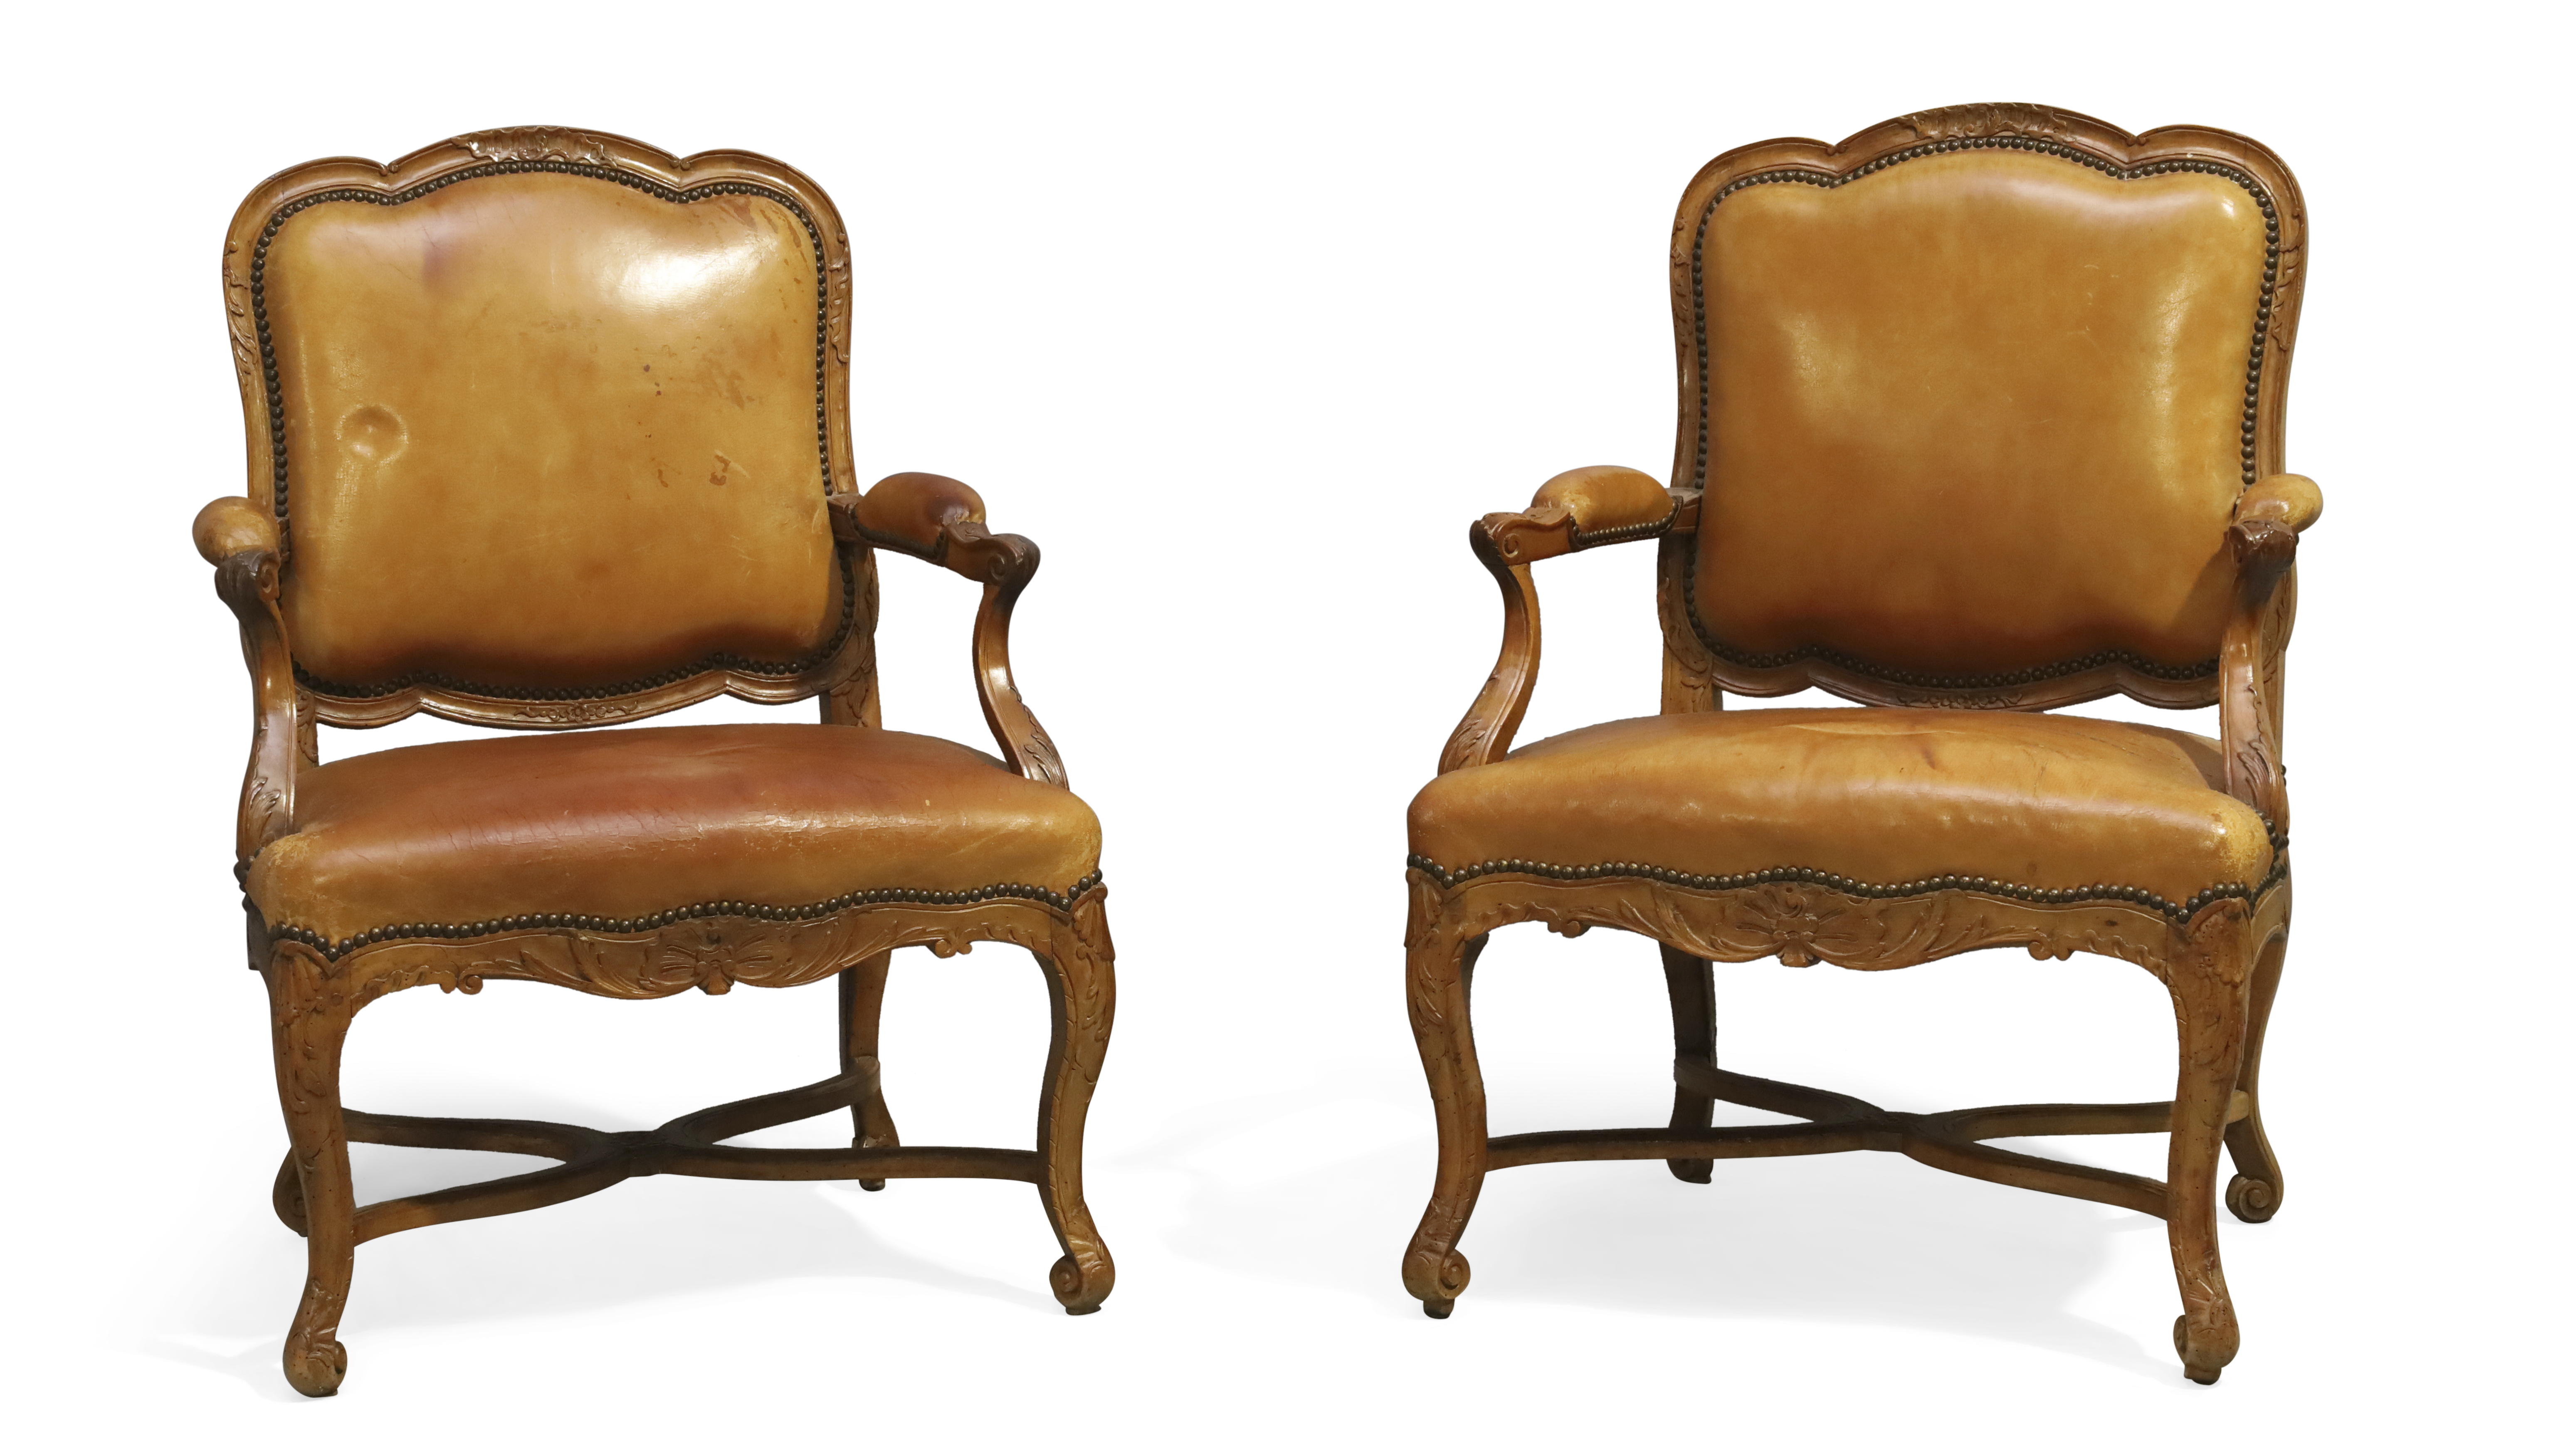 A pair of French walnut fauteuils, Of Regence style, first quarter 19th century, Each with carved... - Image 2 of 5